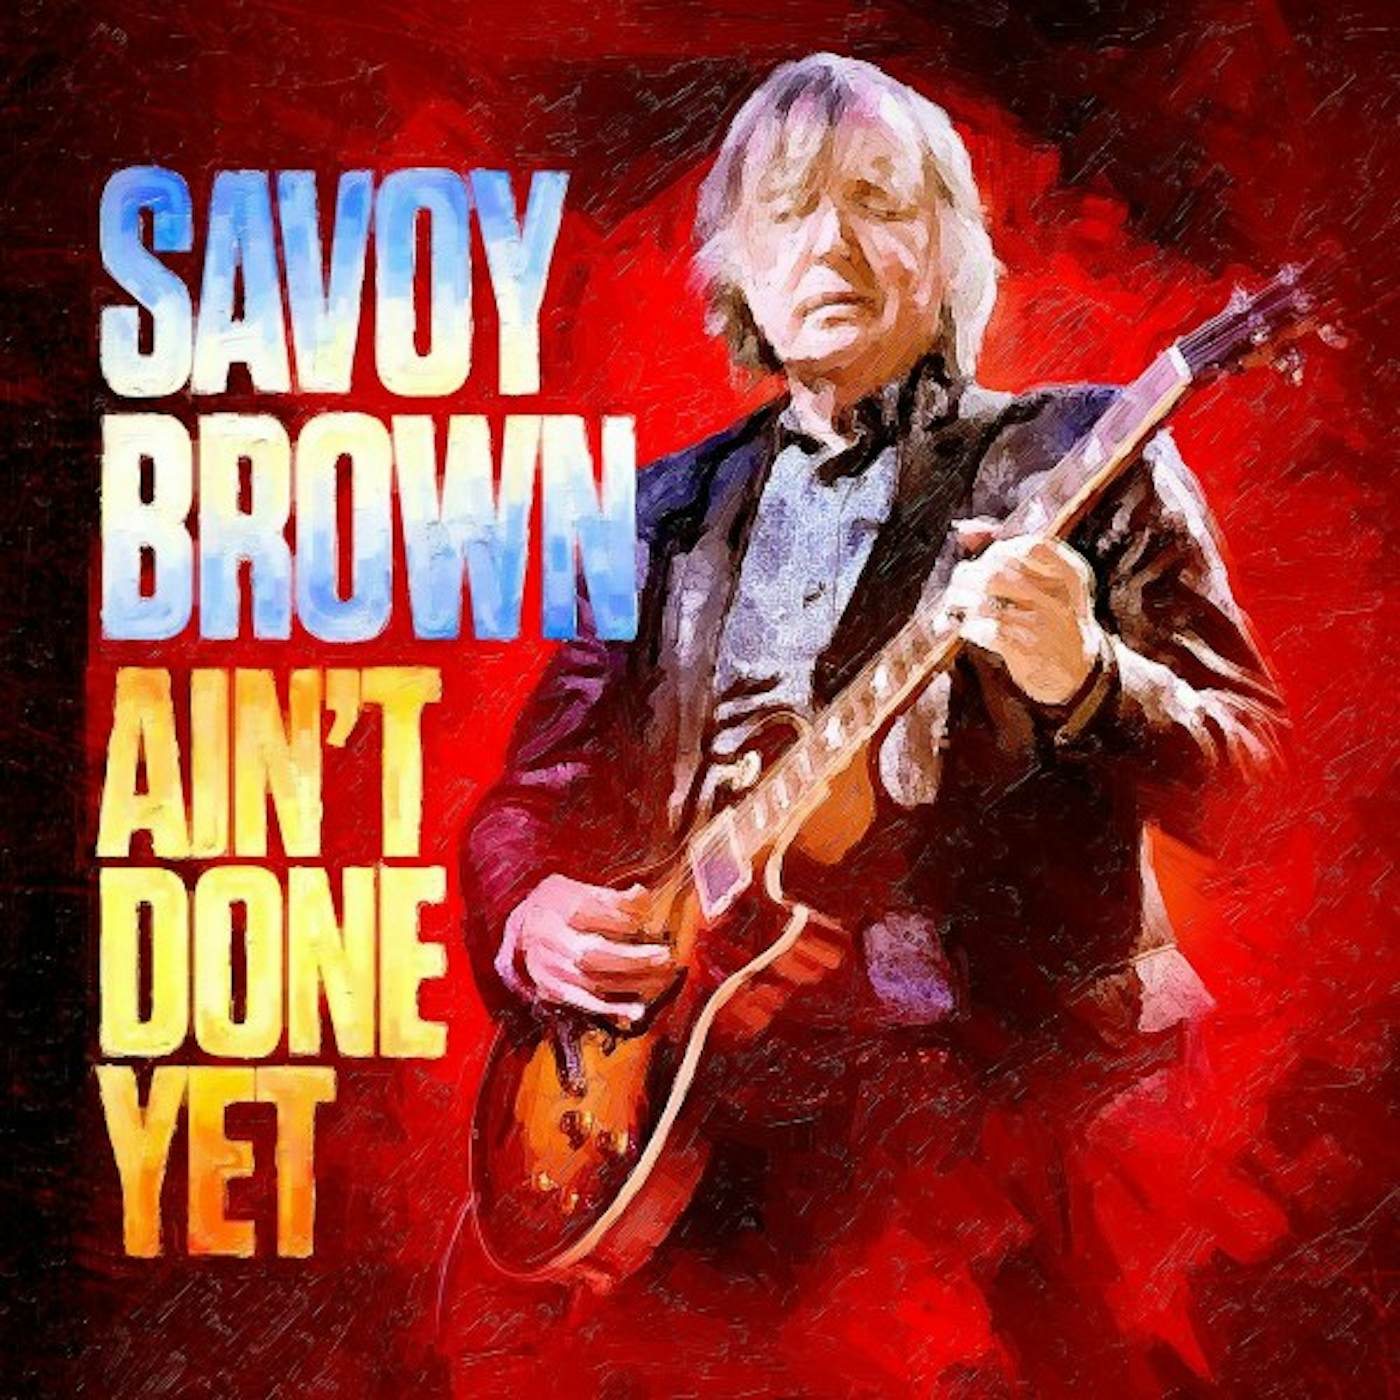 Savoy Brown Ain't Done Yet Vinyl Record